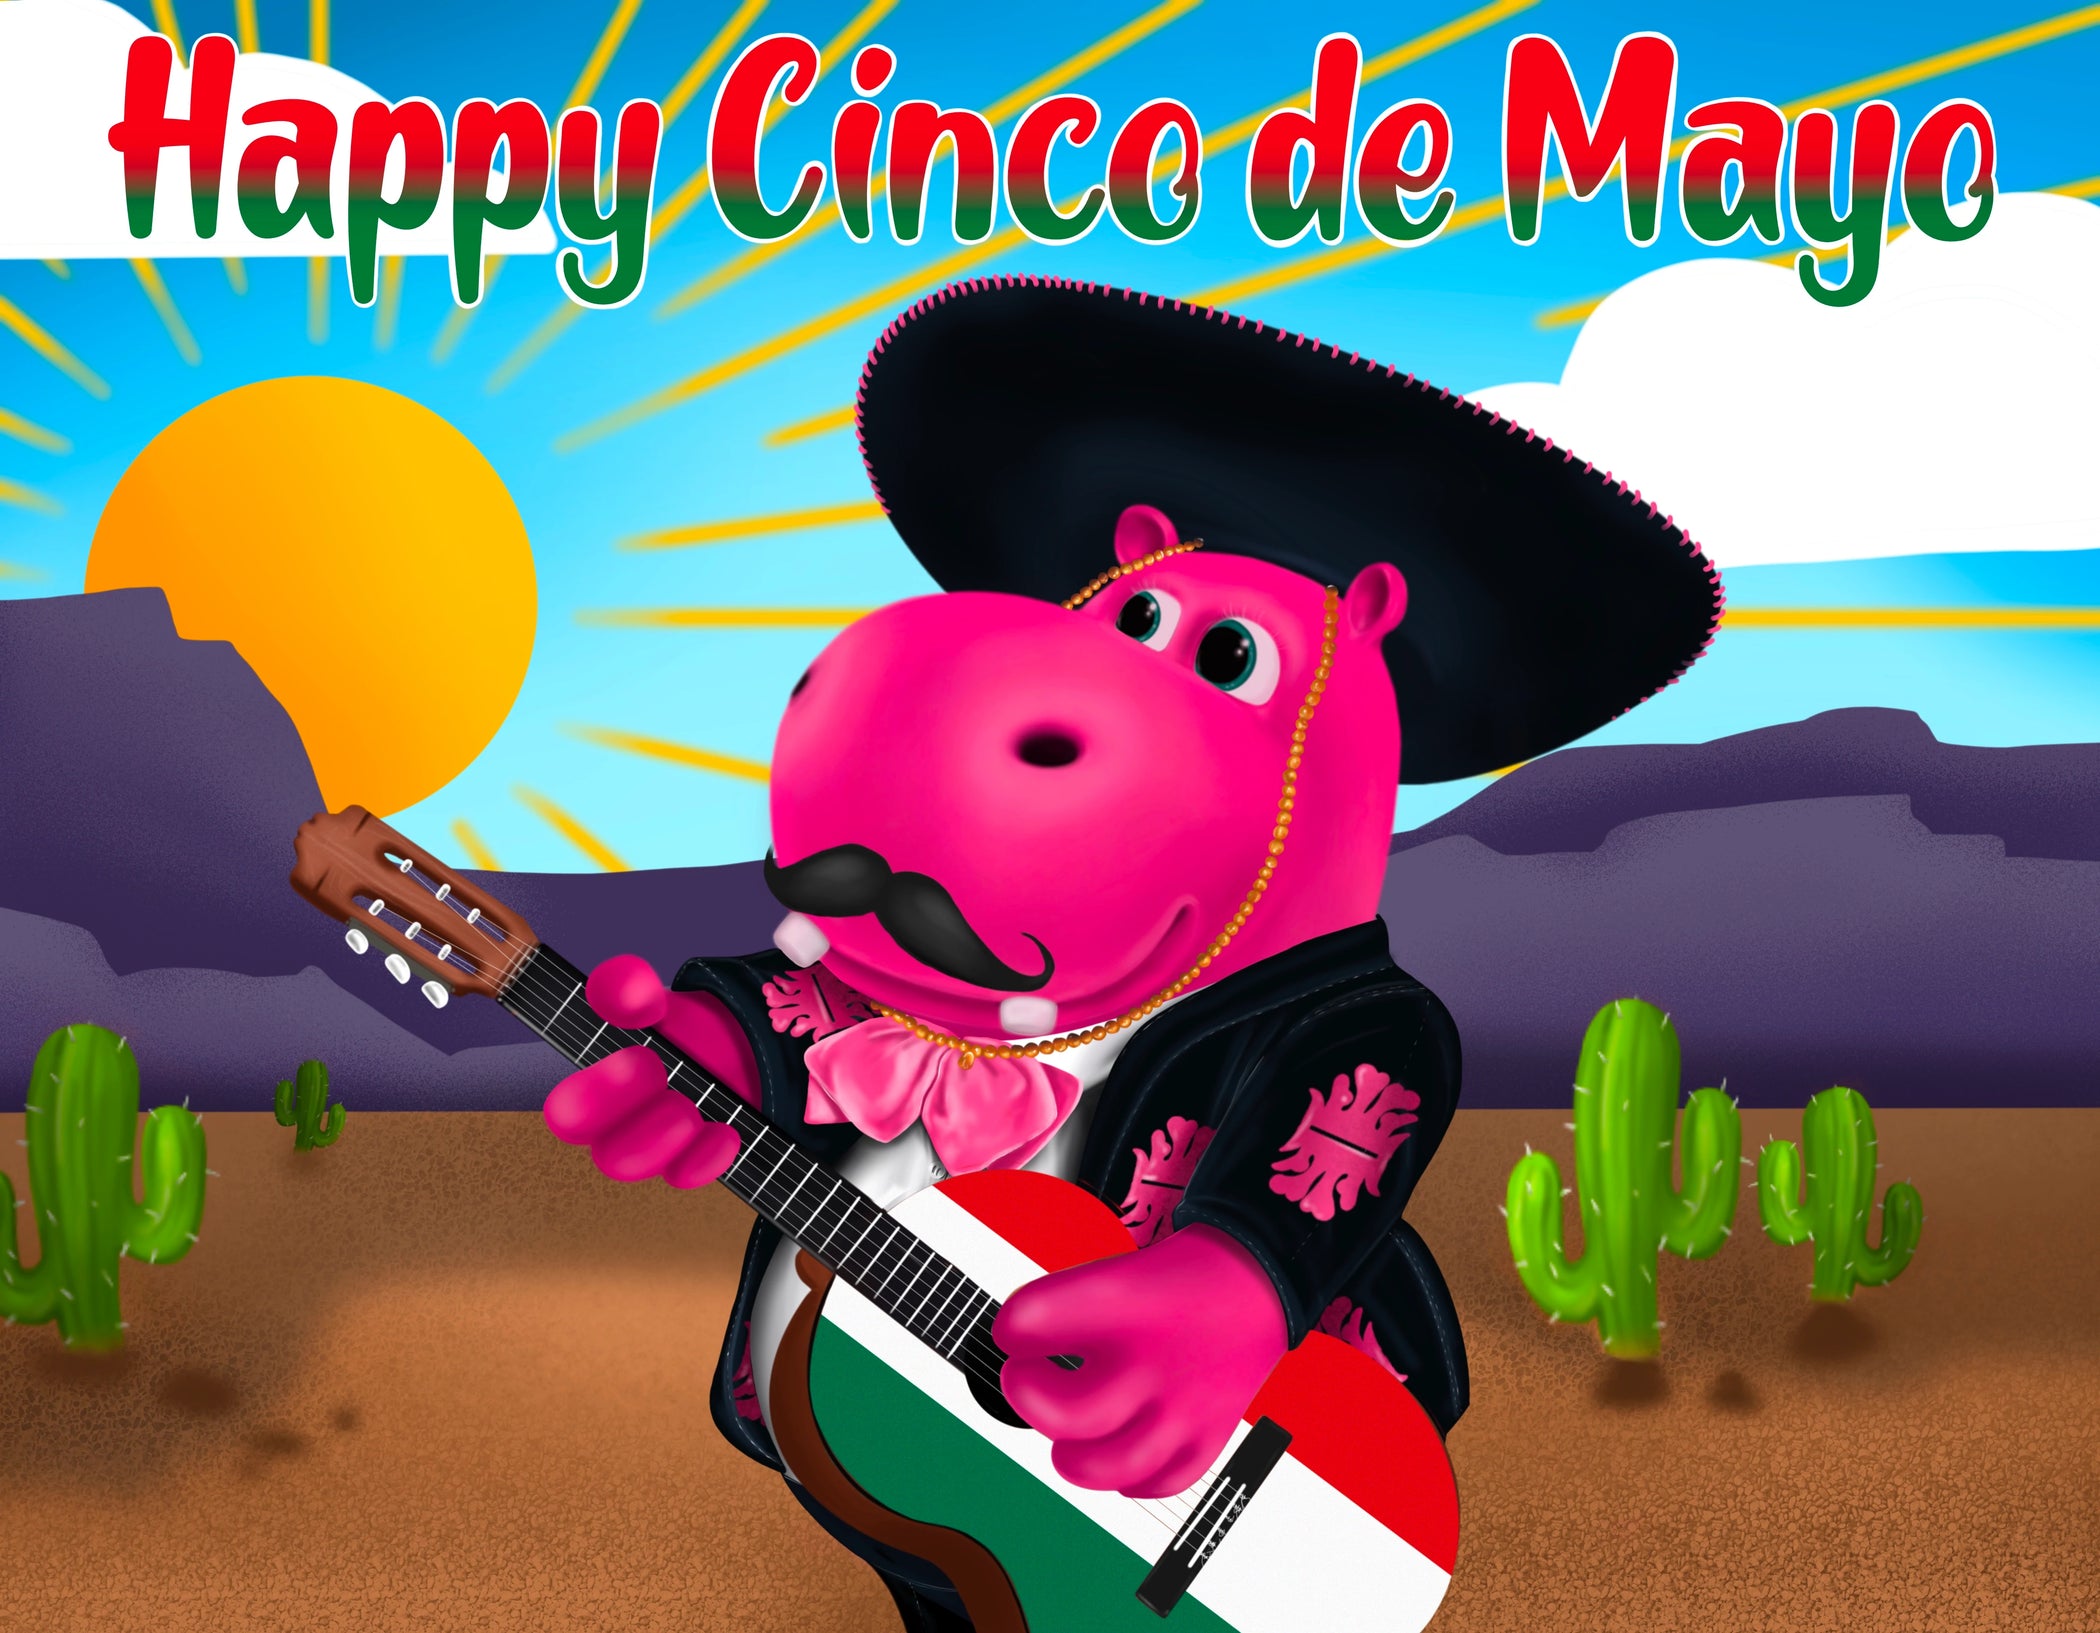 Graphic Designed Image depicting Puddles the Hippo character wearing mustache, sombrero and Mariachi jacket, while playing a guitar painted in the red, white, and green colors of Mexico - Puddles celebrates Cinco de Mayo by singing an ode to Happy Hippo Brand Kratom Powder